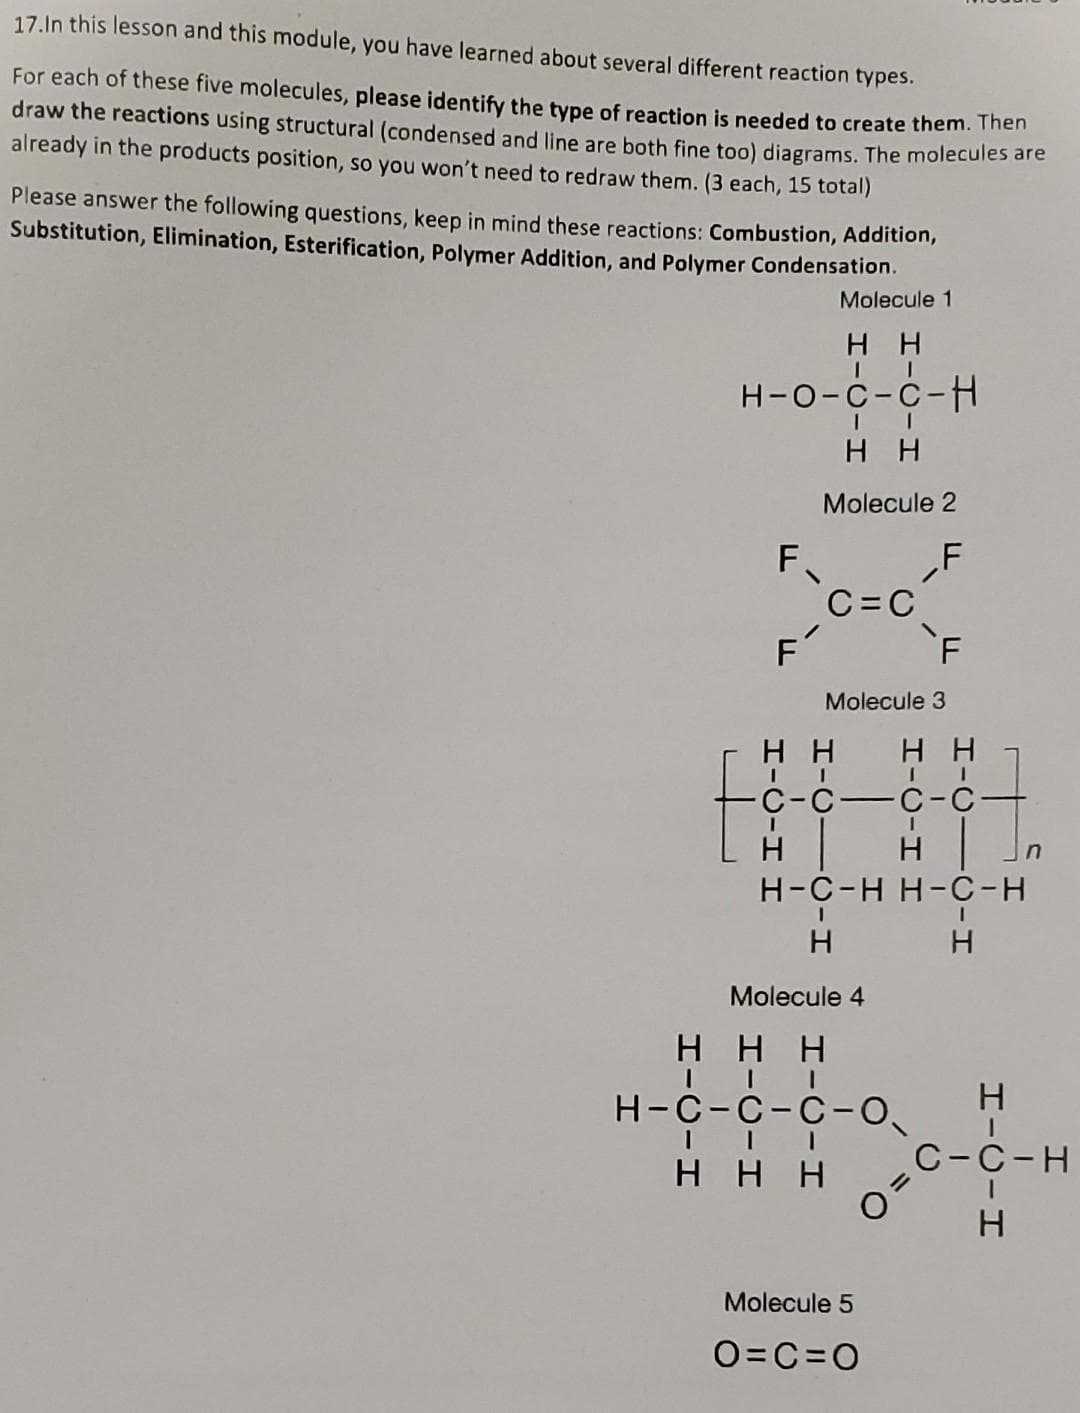 17.In this lesson and this module, you have learned about several different reaction types.
For each of these five molecules, please identify the type of reaction is needed to create them. Then
draw the reactions using structural (condensed and line are both fine too) diagrams. The molecules are
already in the products position, so you won't need to redraw them. (3 each, 15 total)
Please answer the following questions, keep in mind these reactions: Combustion, Addition,
Substitution, Elimination, Esterification, Polymer Addition, and Polymer Condensation.
Molecule 1
нн
H-O-C-C-H
H
F
F
H H-O-H
HH
Molecule 2
C=C
Molecule 3
HICIC-H
HH
-C-C-C
H
н
H-C-H H-C-H
H
Molecule 4
F
HHH
H-C-C-C-0₁
II
HH
HH
I
O
Molecule 5
O=C=O
HIC-H
n
C-C-H